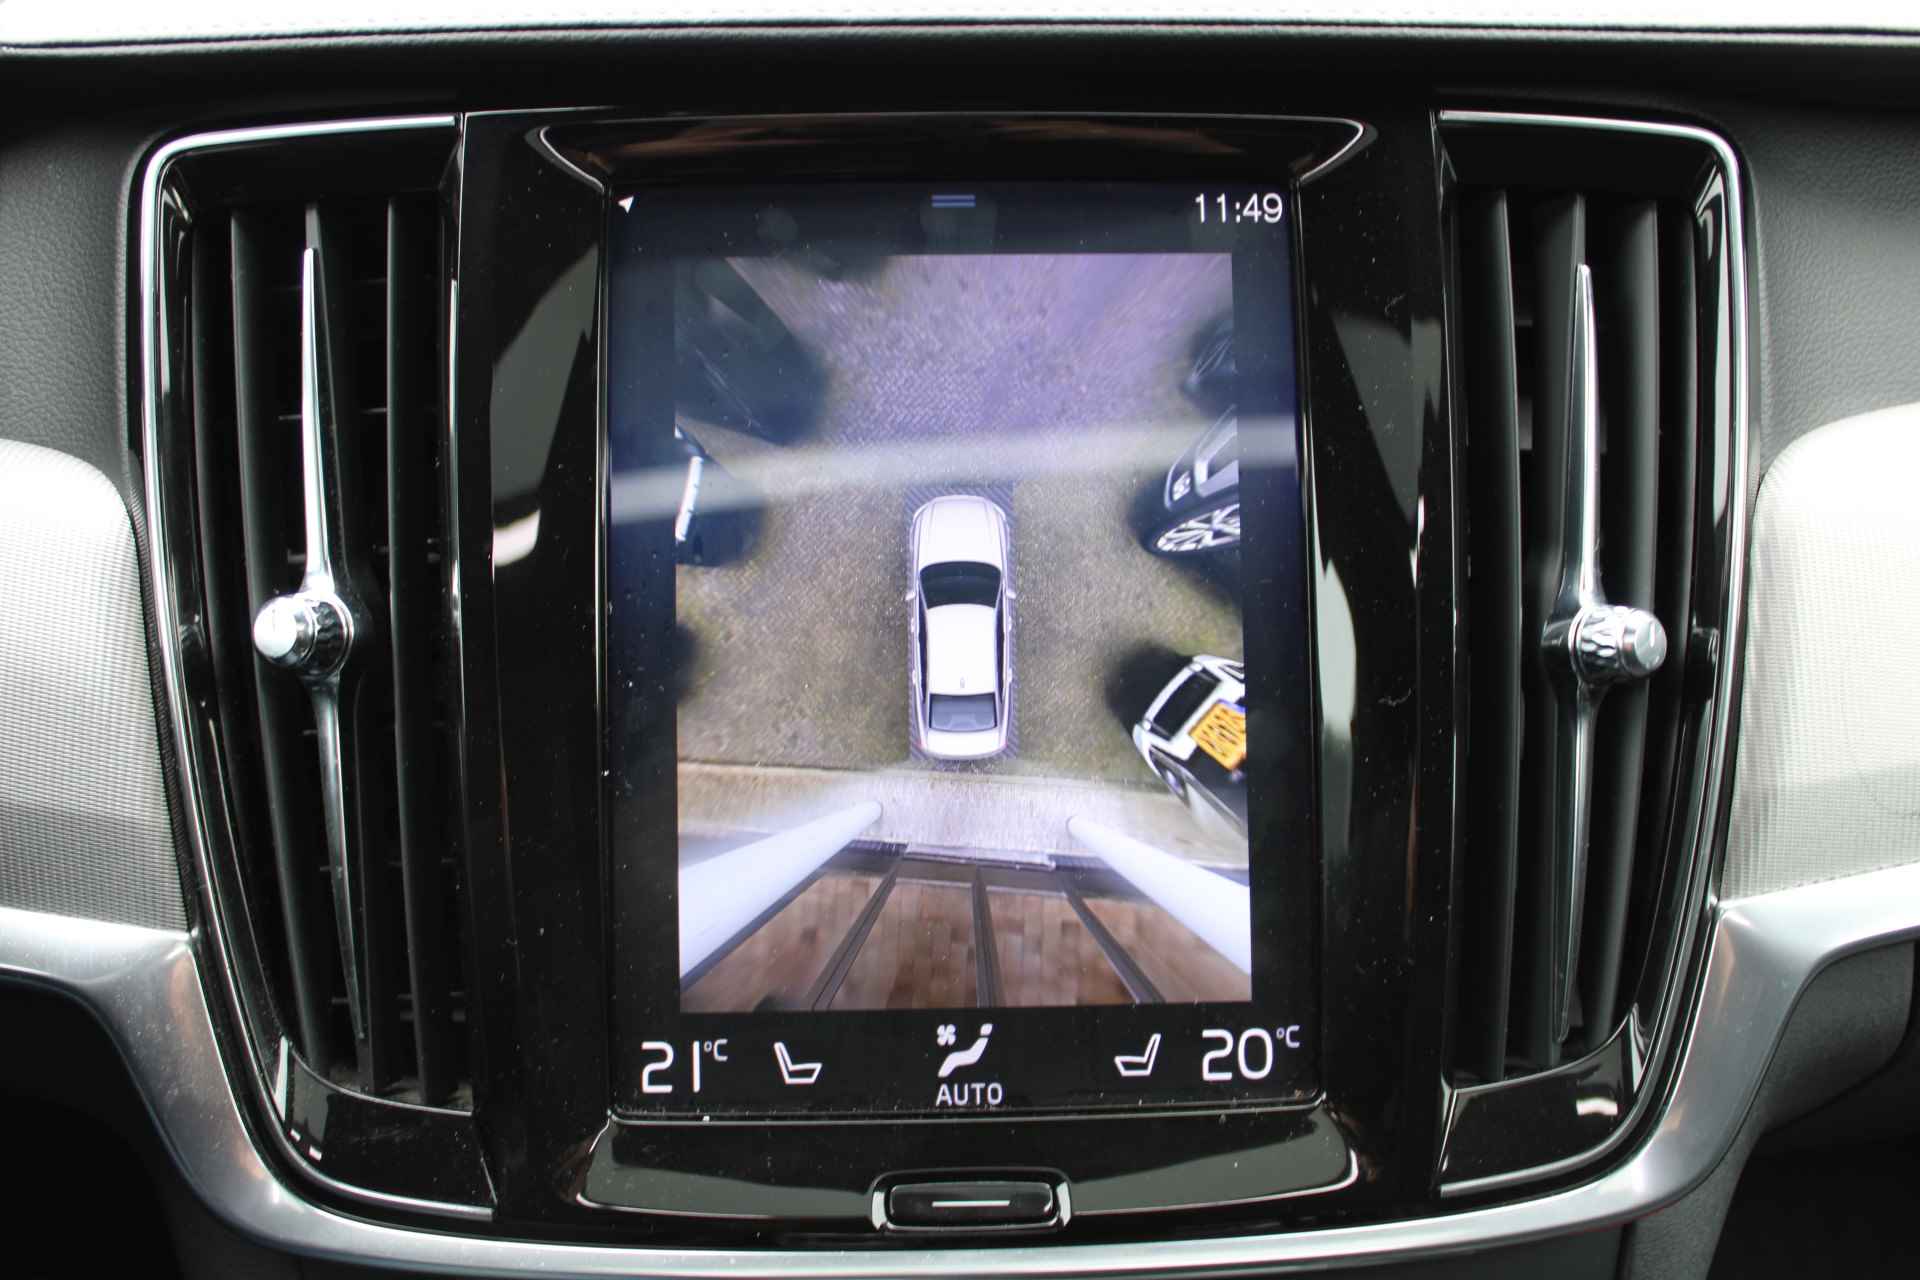 Volvo S90 2.0 T8 AWD R-DESIGN GEARTRONIC SCHUIFDAK 360 CAMERA- HEAD UP DISPLAY- BOWERS & WILKINS SOUND - 14/36